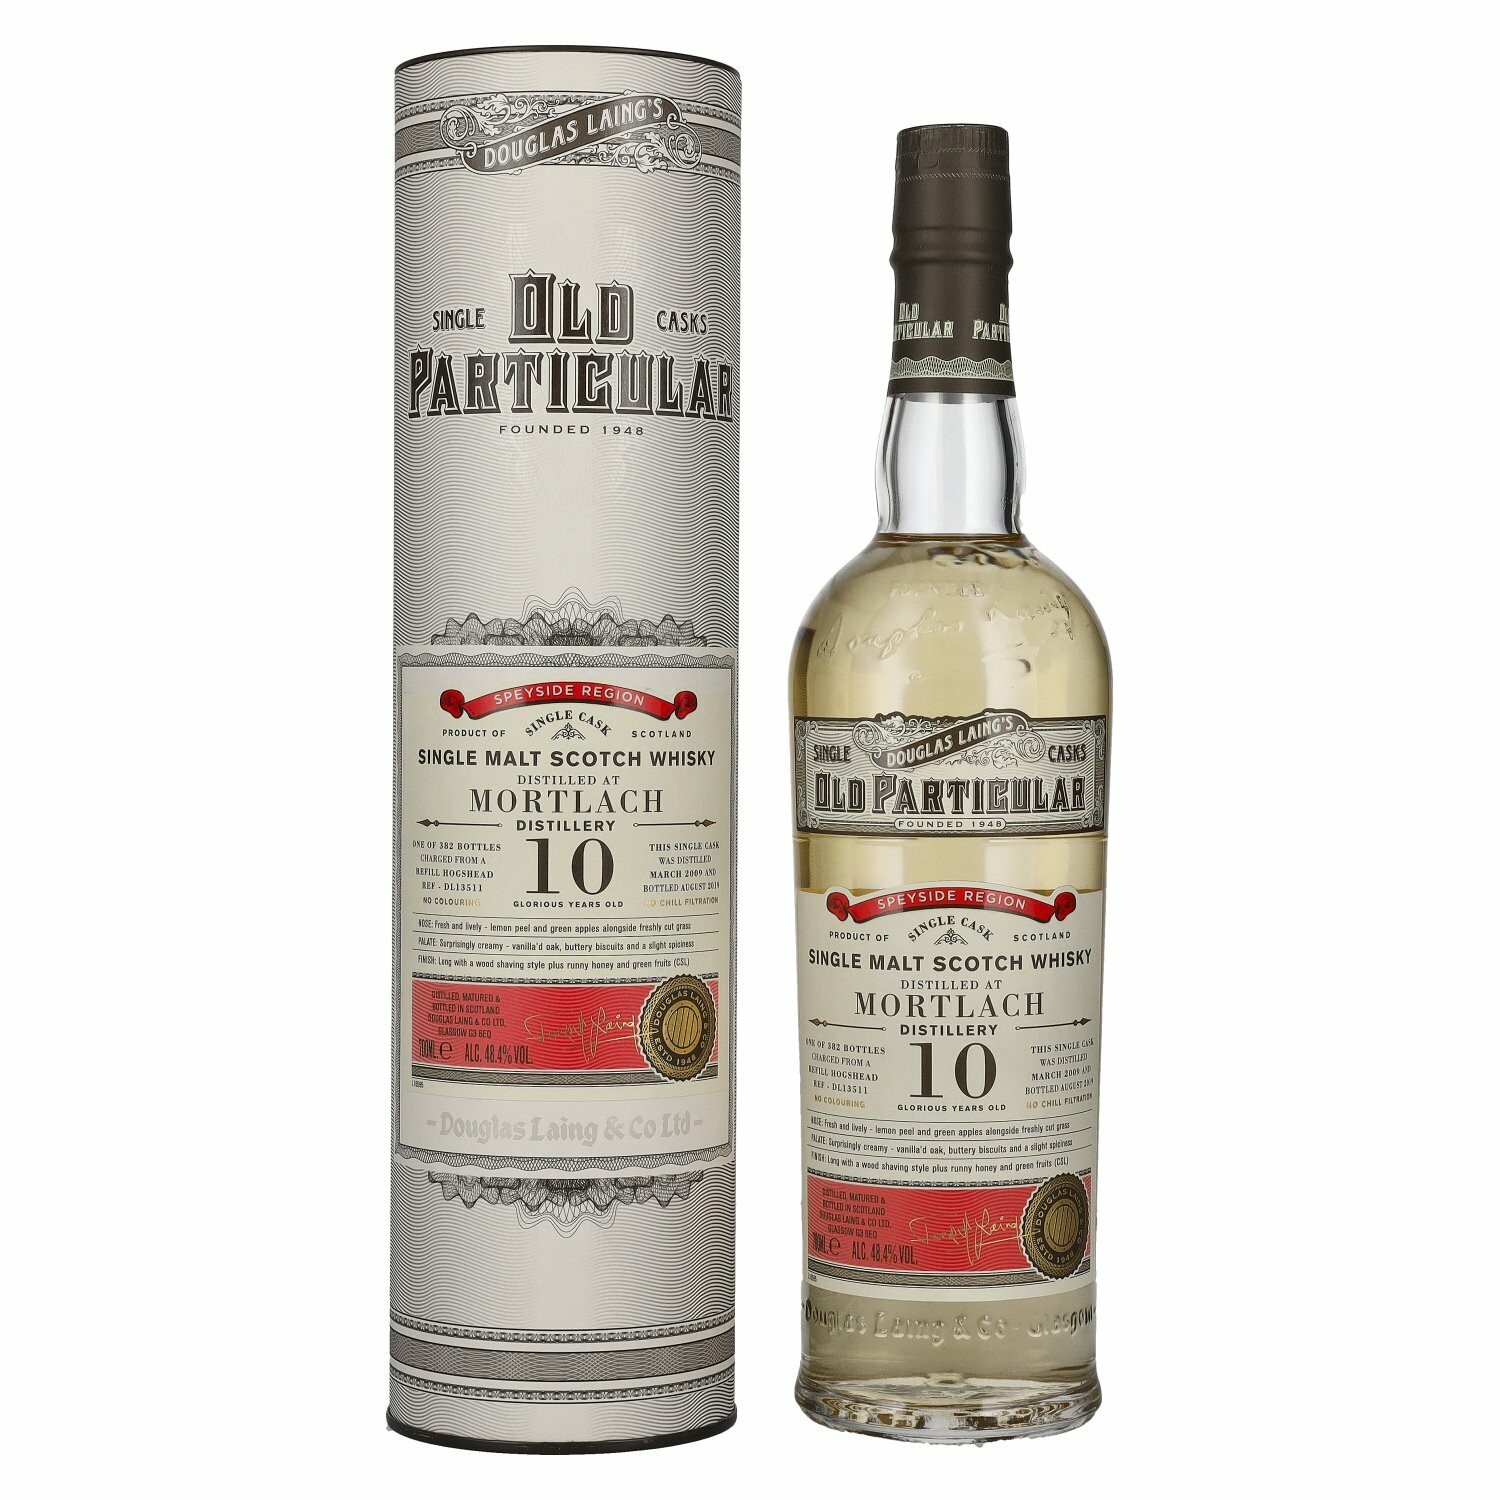 Douglas Laing OLD PARTICULAR Mortlach 10 Years Old Single Cask Malt 2009 48,4% Vol. 0,7l in Giftbox